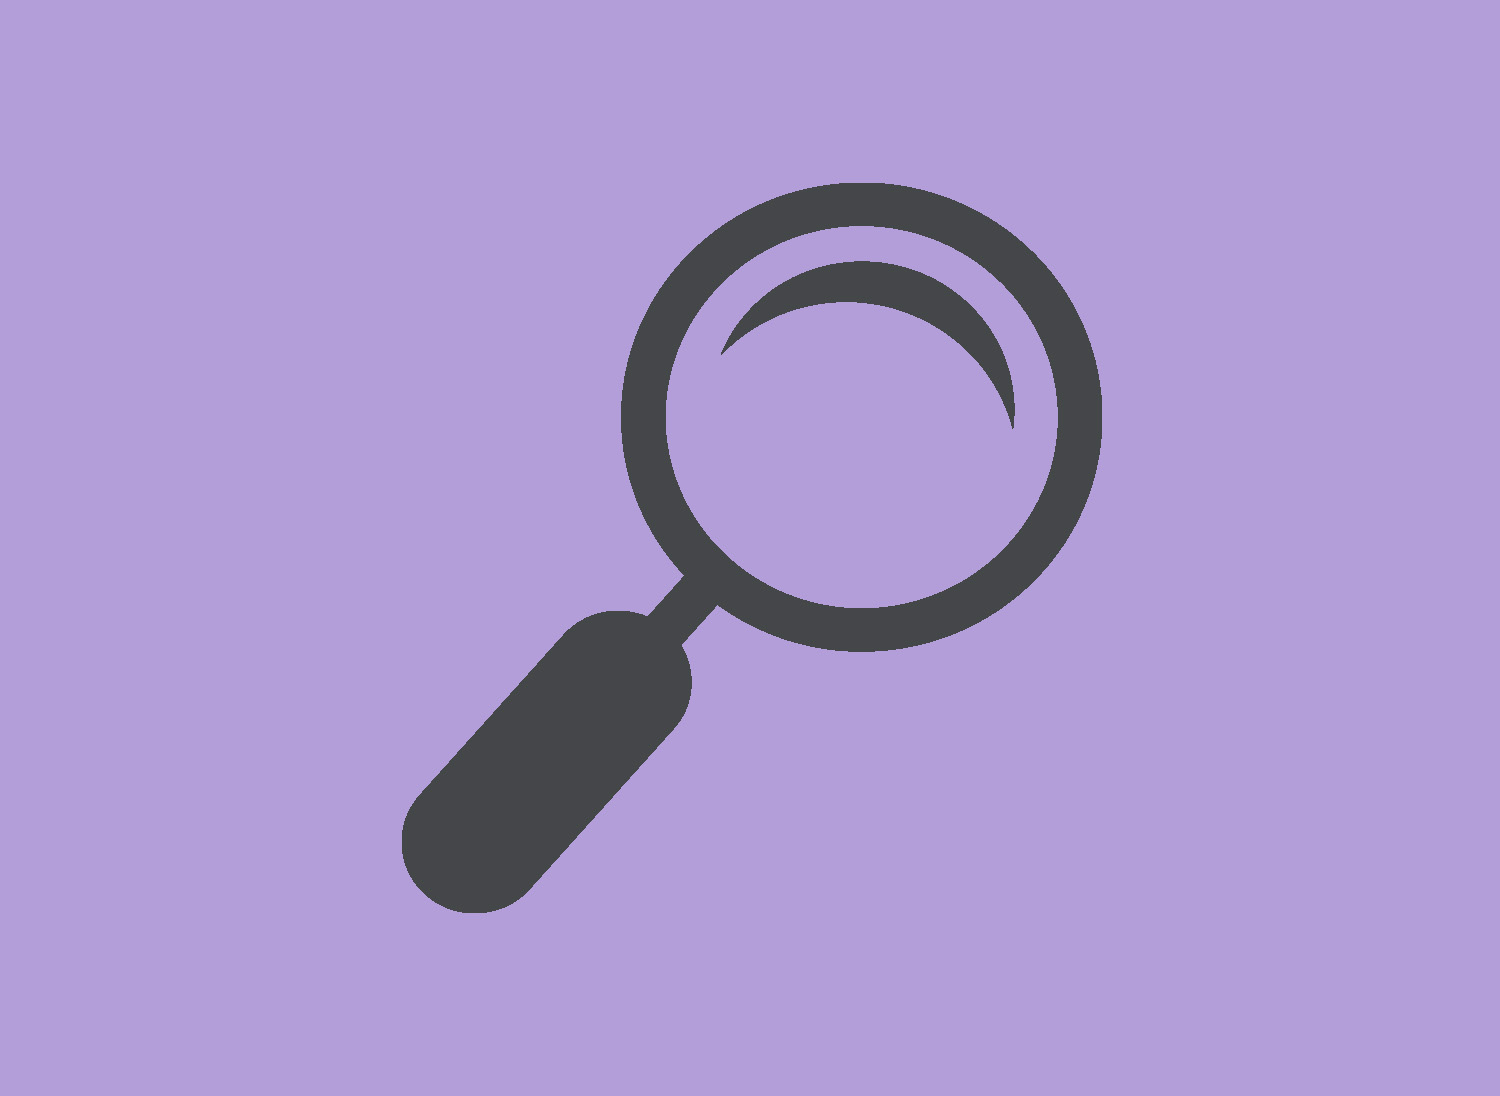 Item Specifications Logo. Image includes gray magnifying glass on purple background.